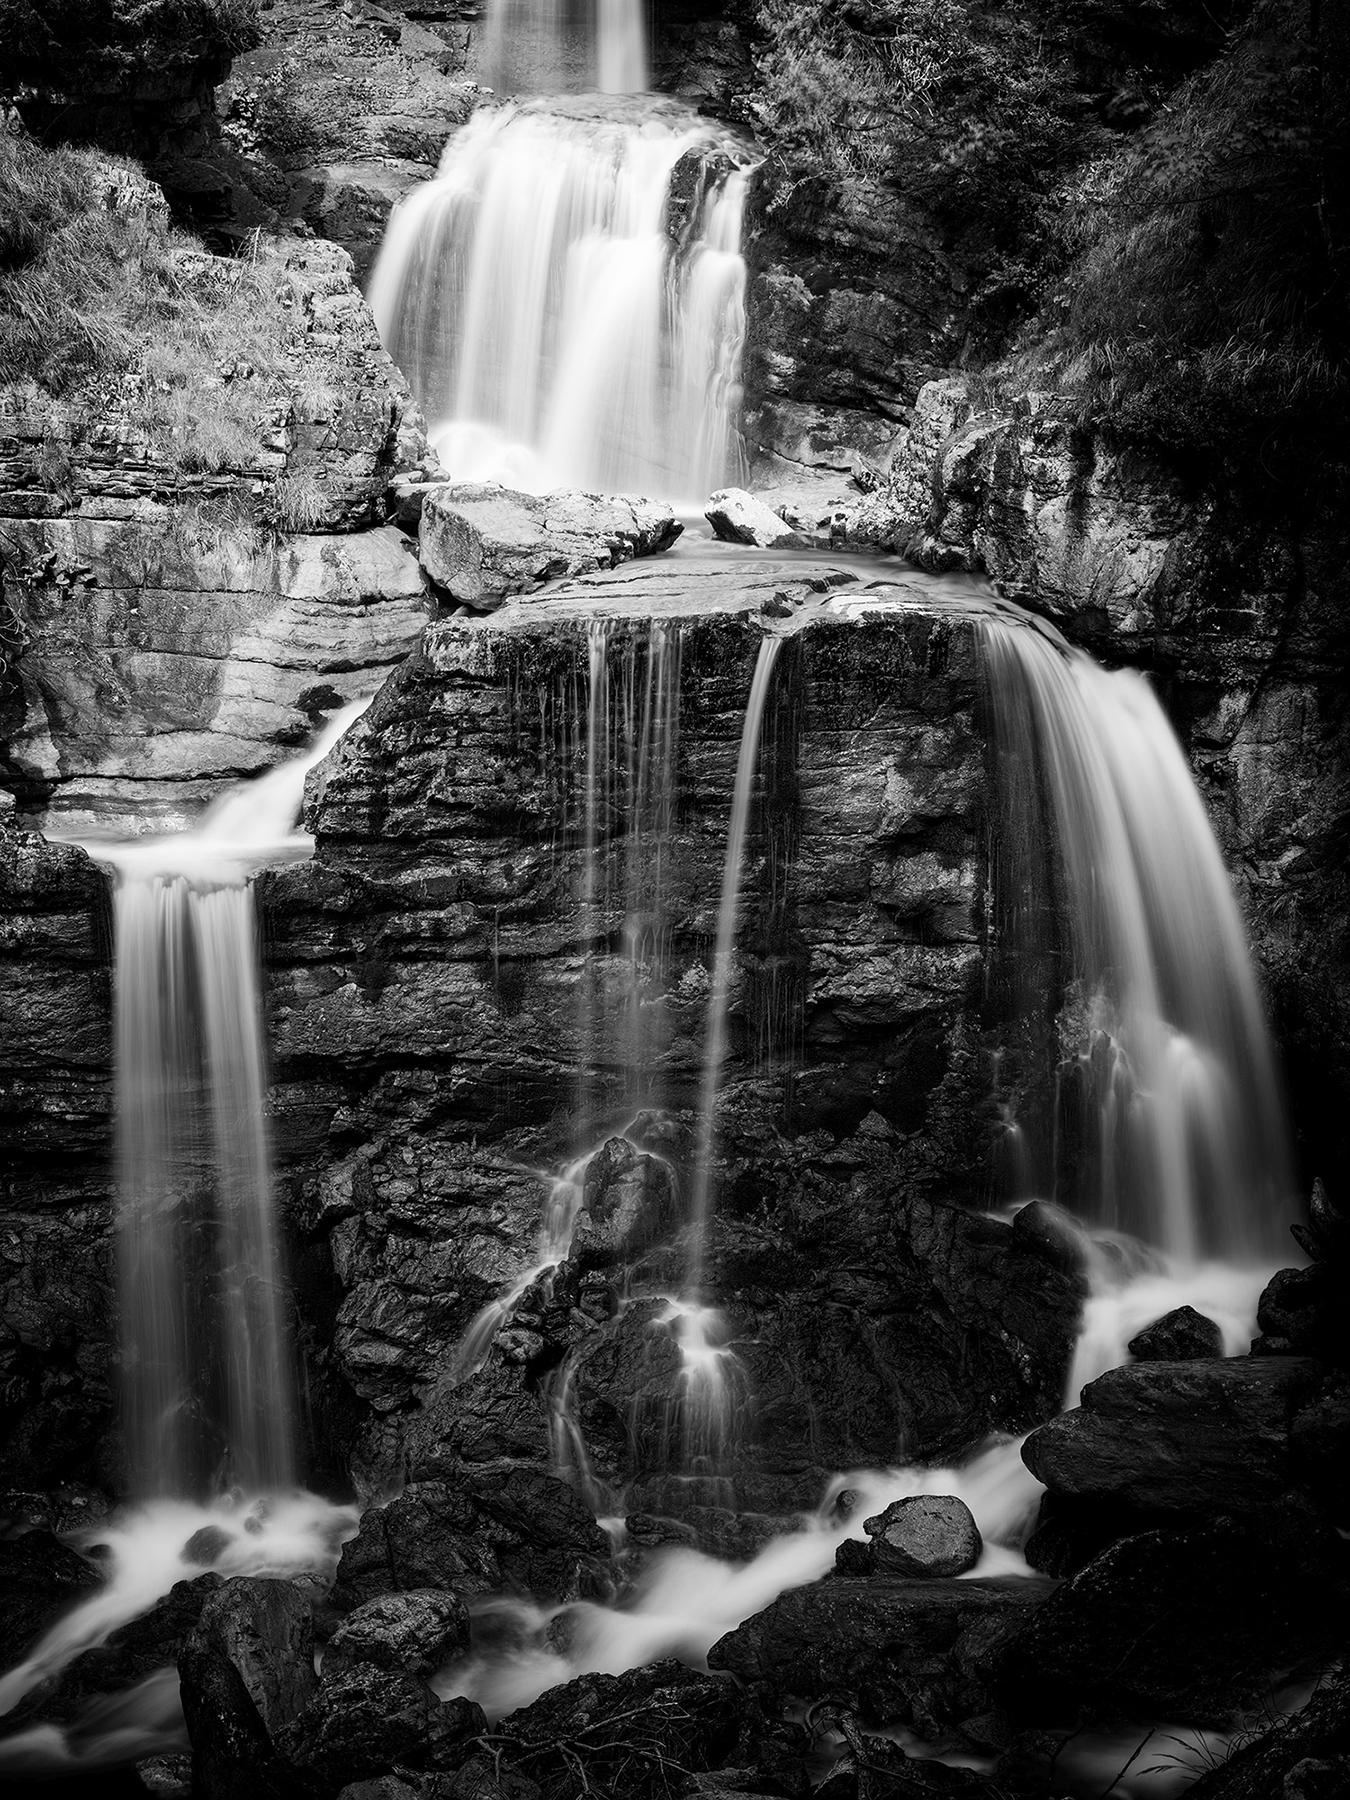 Gerald Berghammer Landscape Photograph - Kuhflucht, lower Waterfall, Germany, black and white art landscape photography